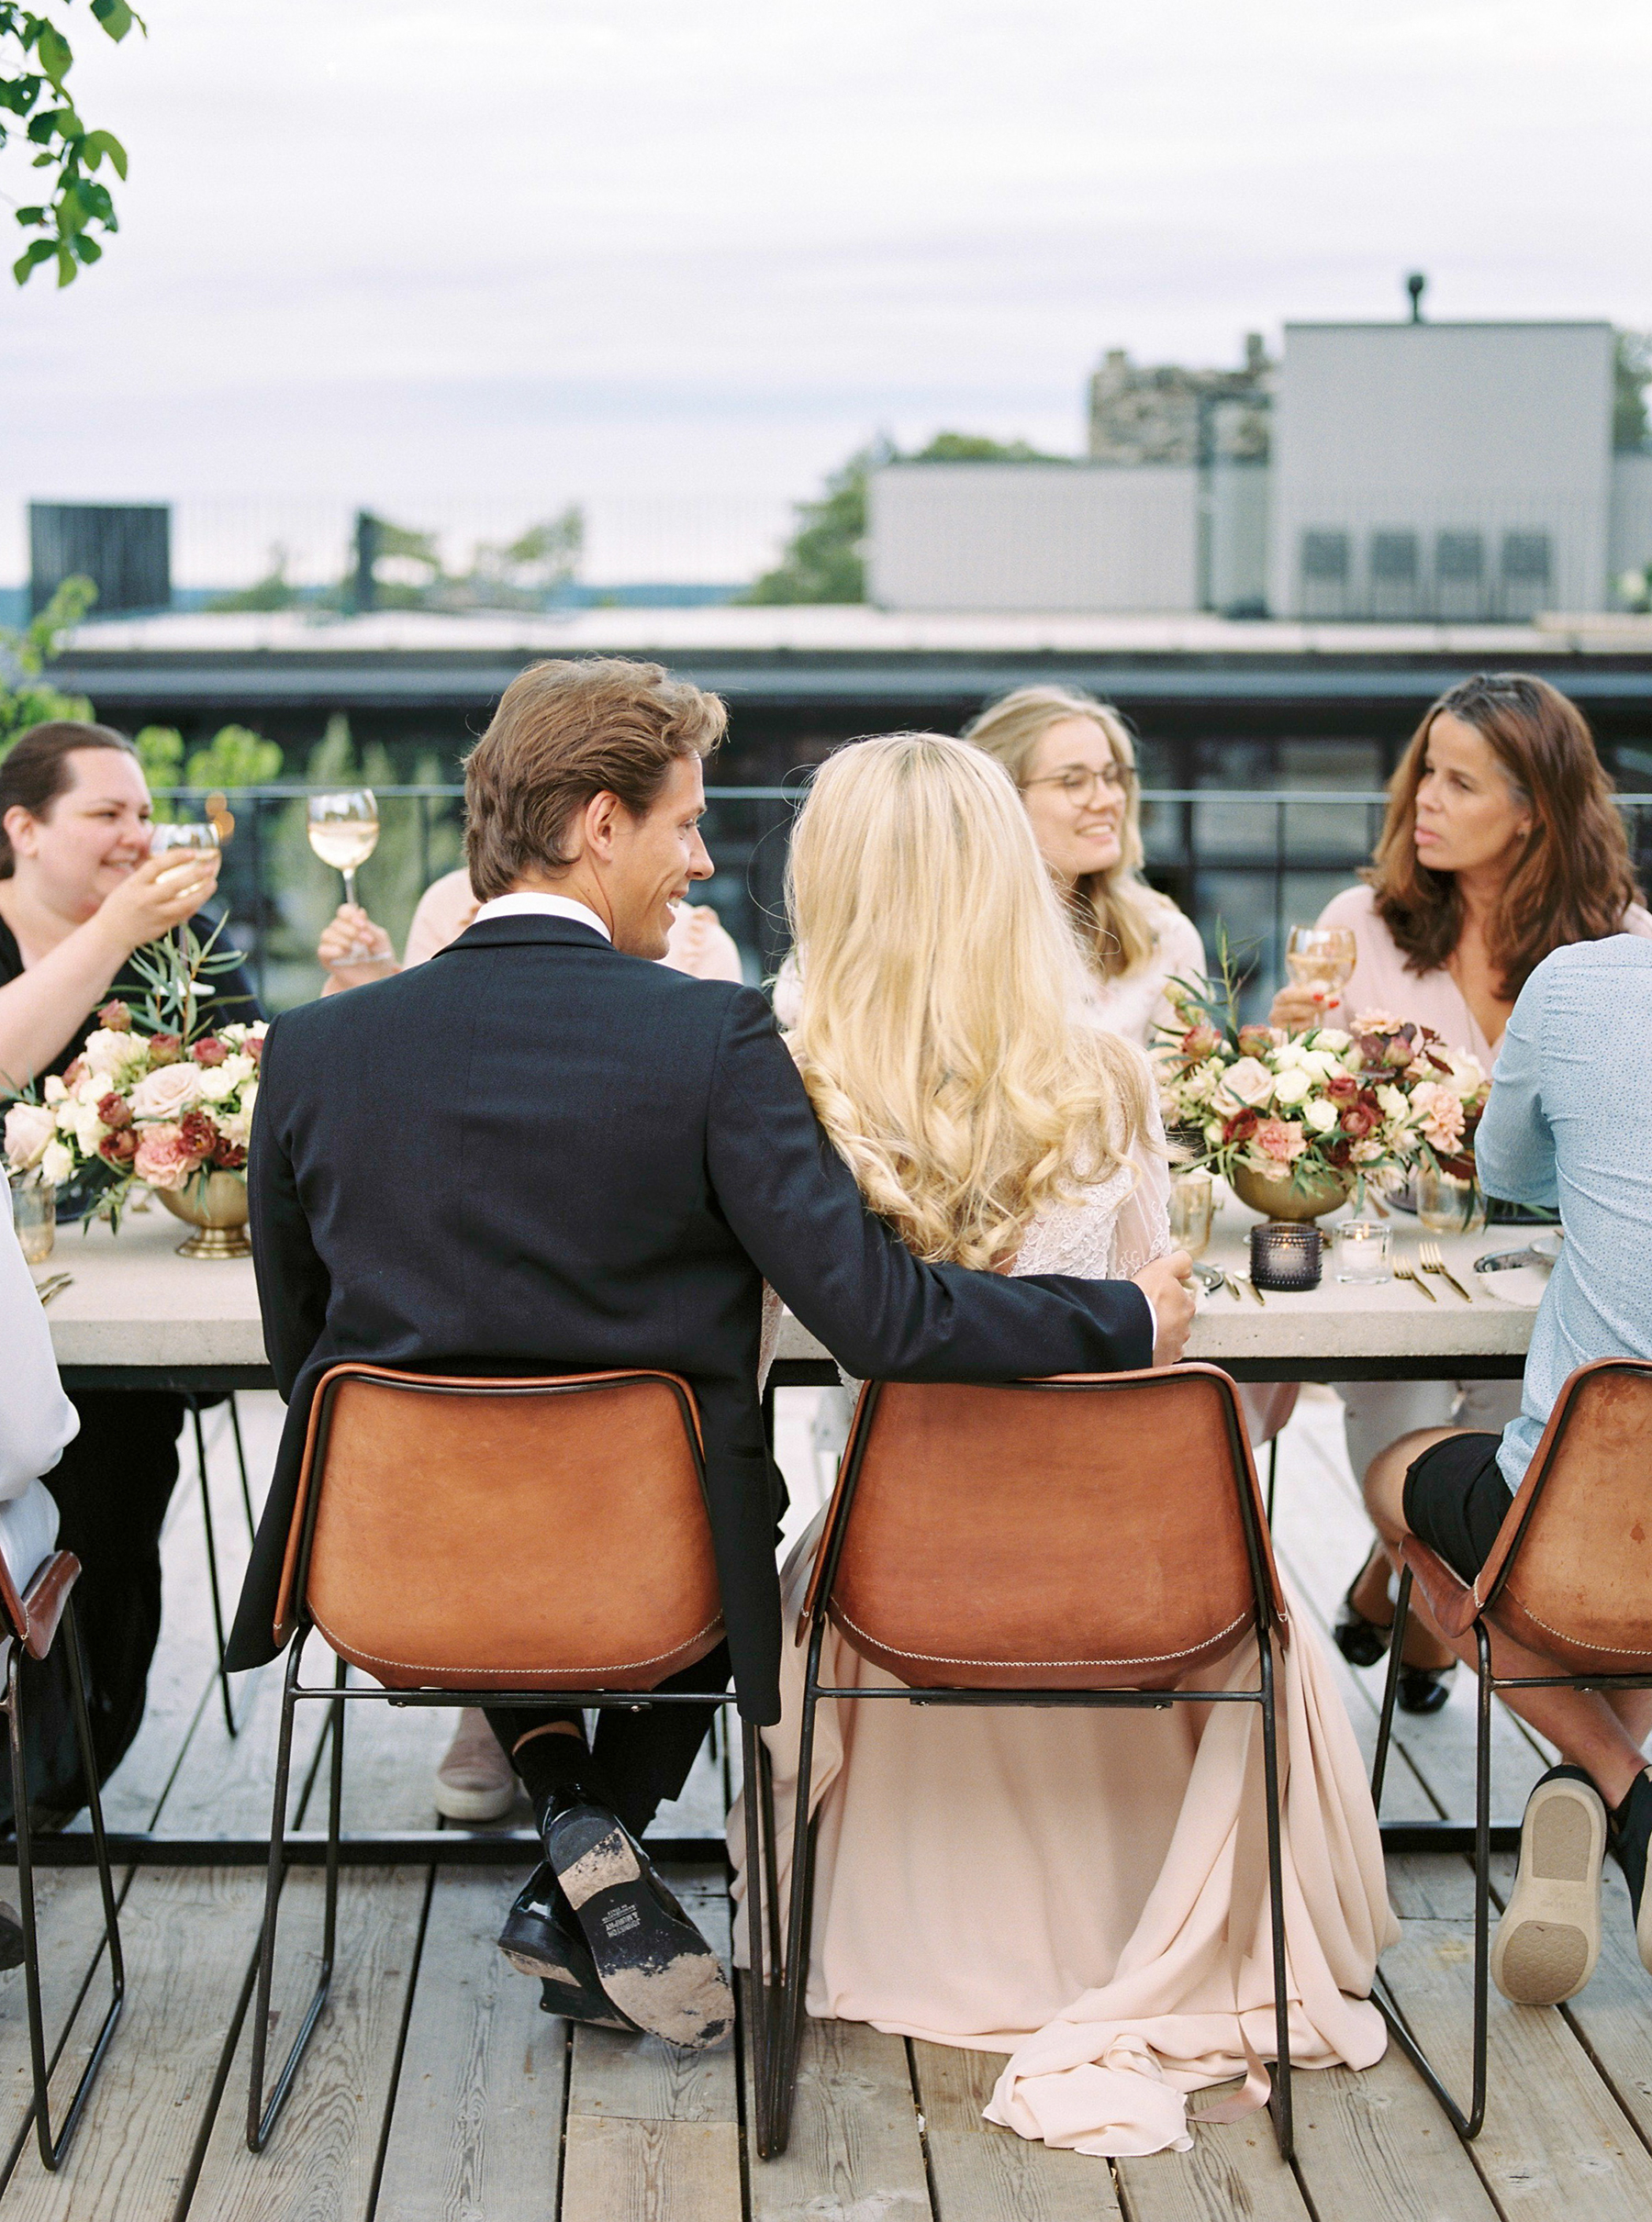 Bright and Warm Colored Wedding Inspiration in Sweden 2 Brides Photography52